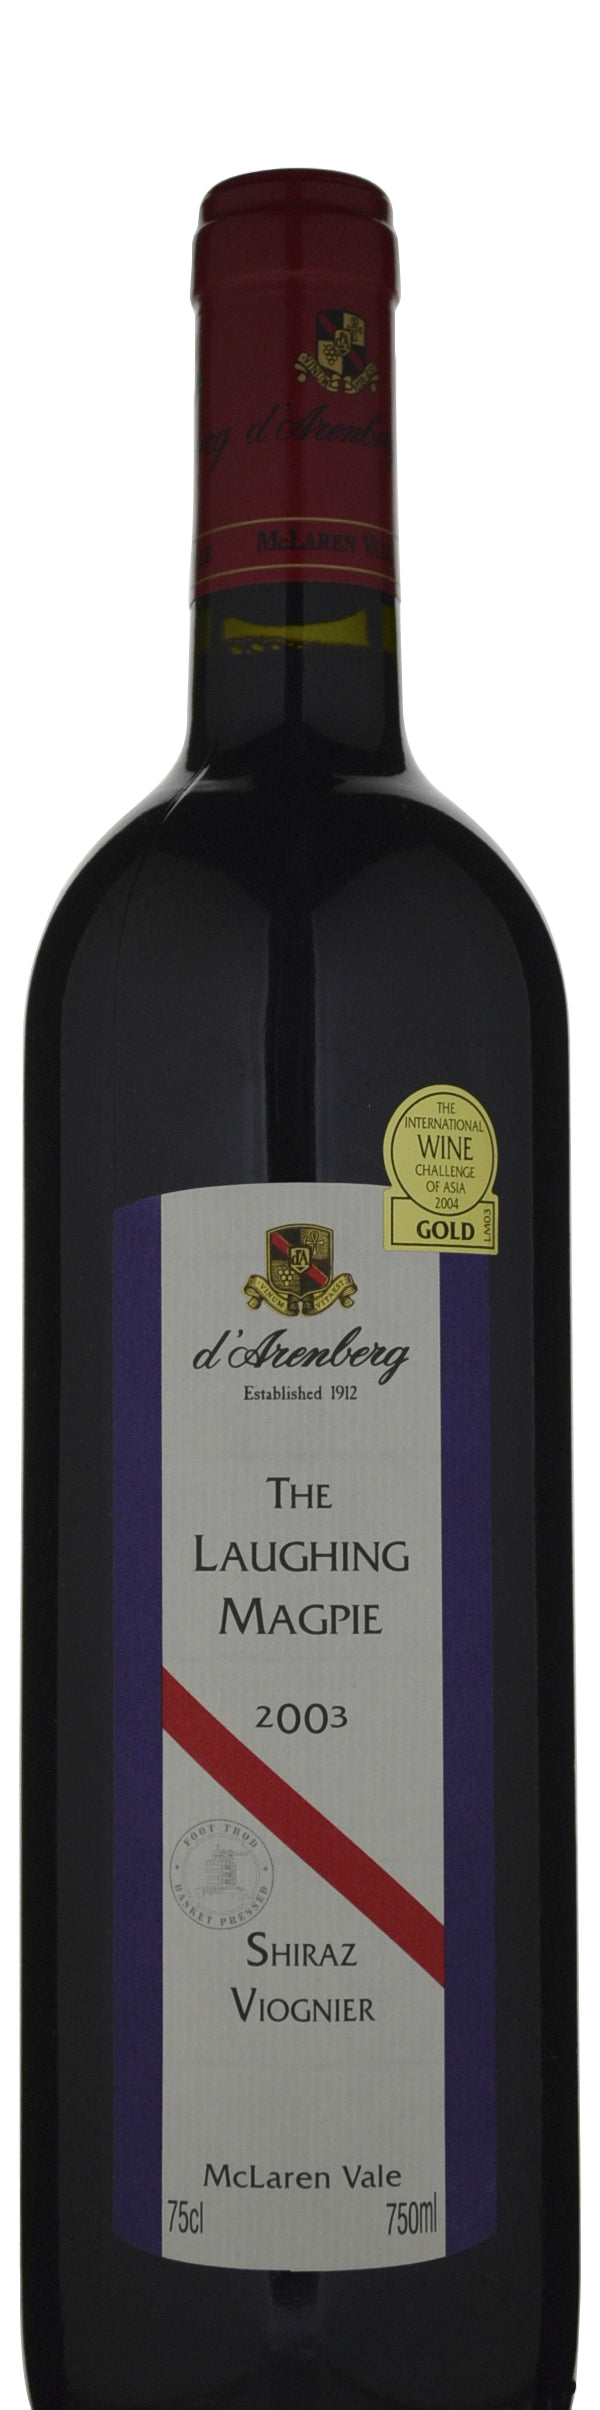 d'Arenberg The Laughing Magpie Shiraz Viognier 2003